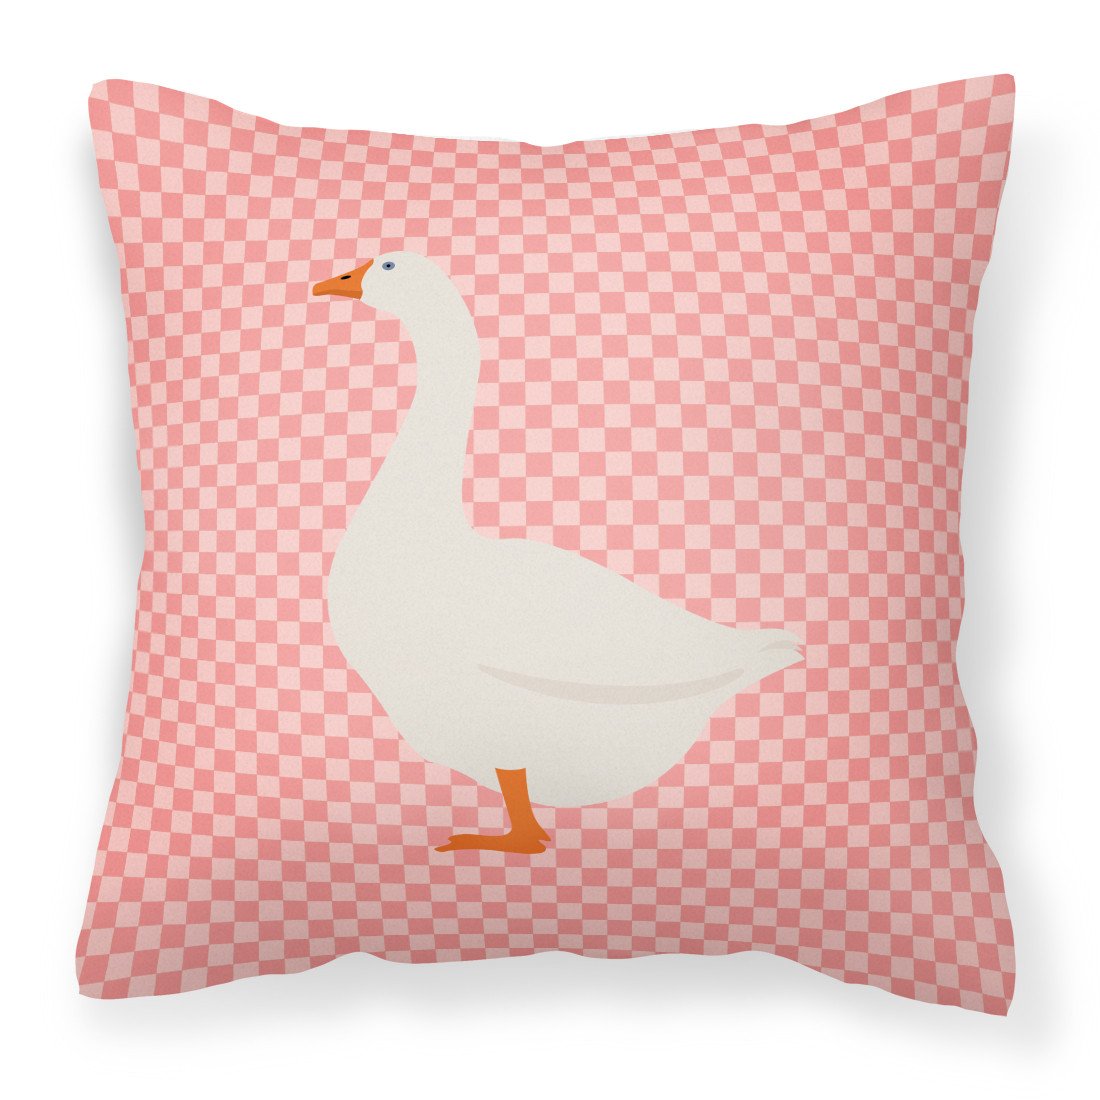 Embden Goose Pink Check Fabric Decorative Pillow BB7892PW1818 by Caroline's Treasures